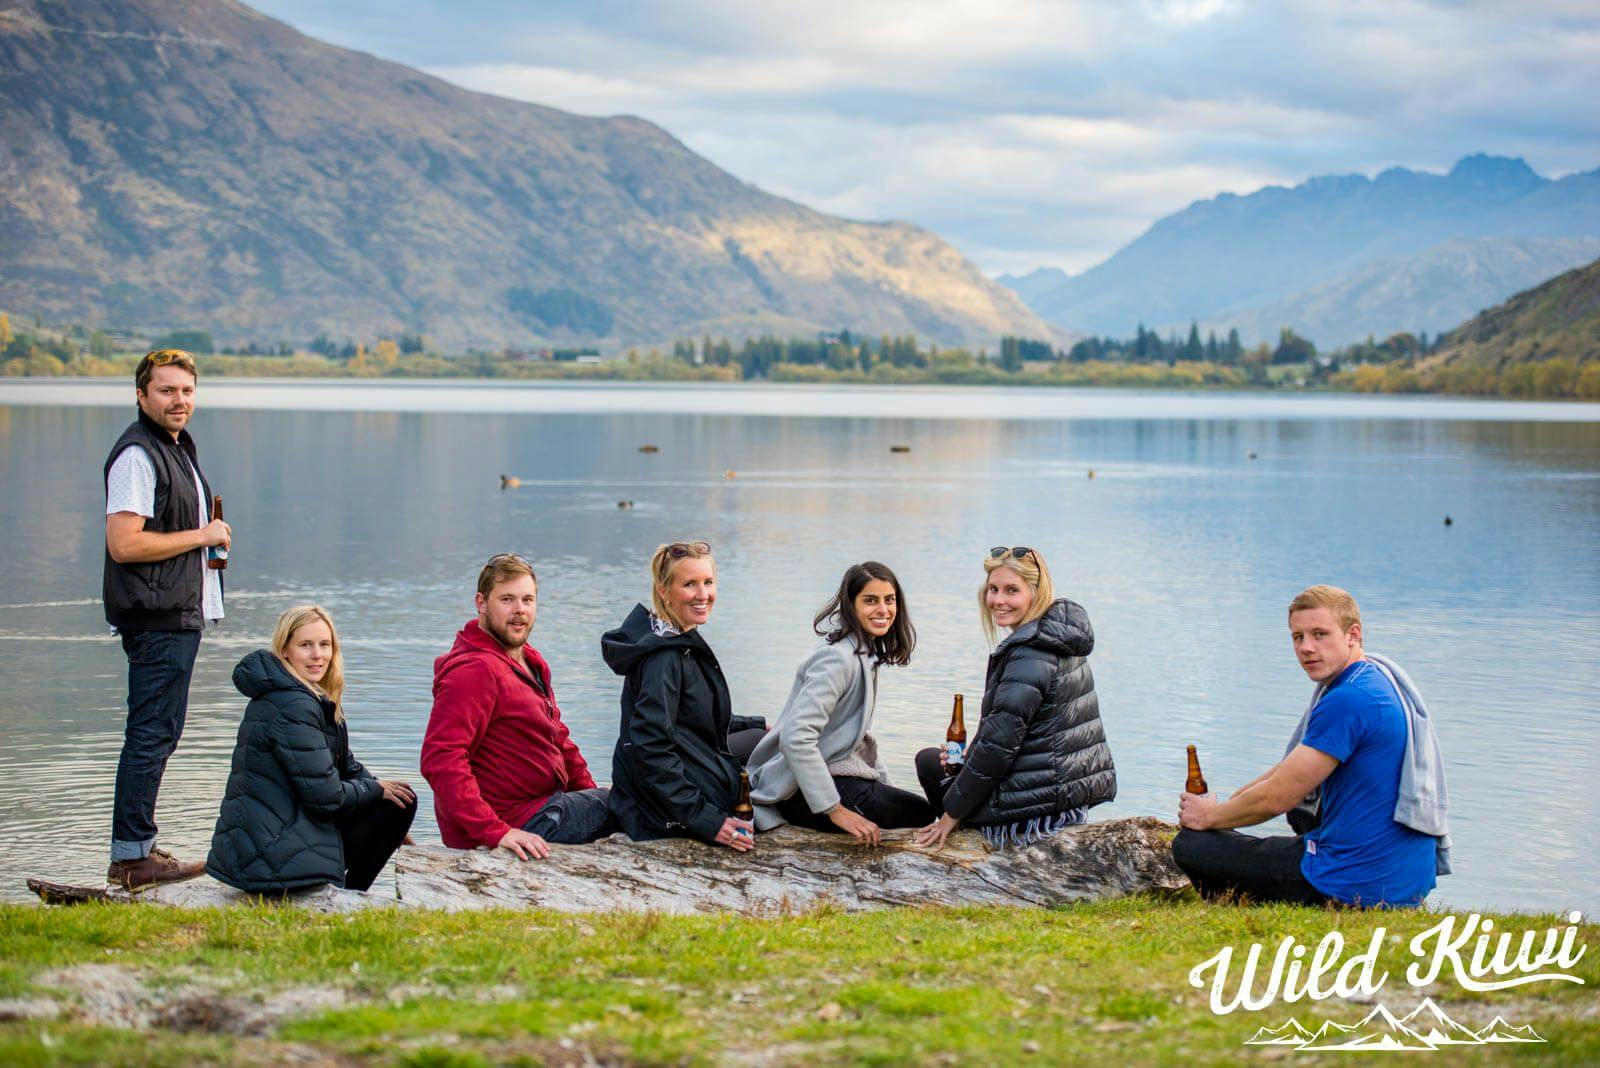 Tour New Zealand with a small group - See unbelievable sights